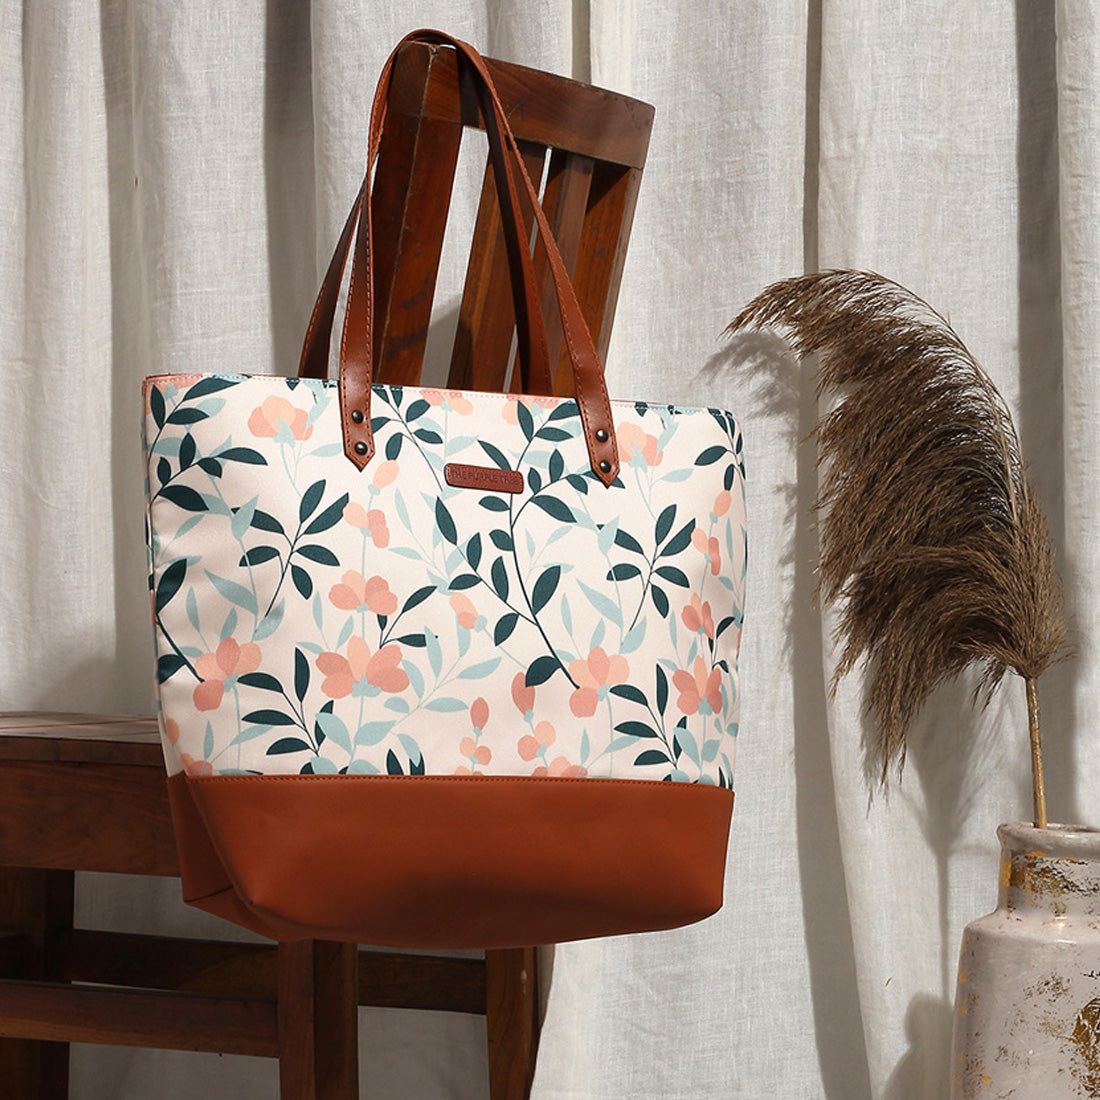  Stylish floral tote bag with brown leather handle